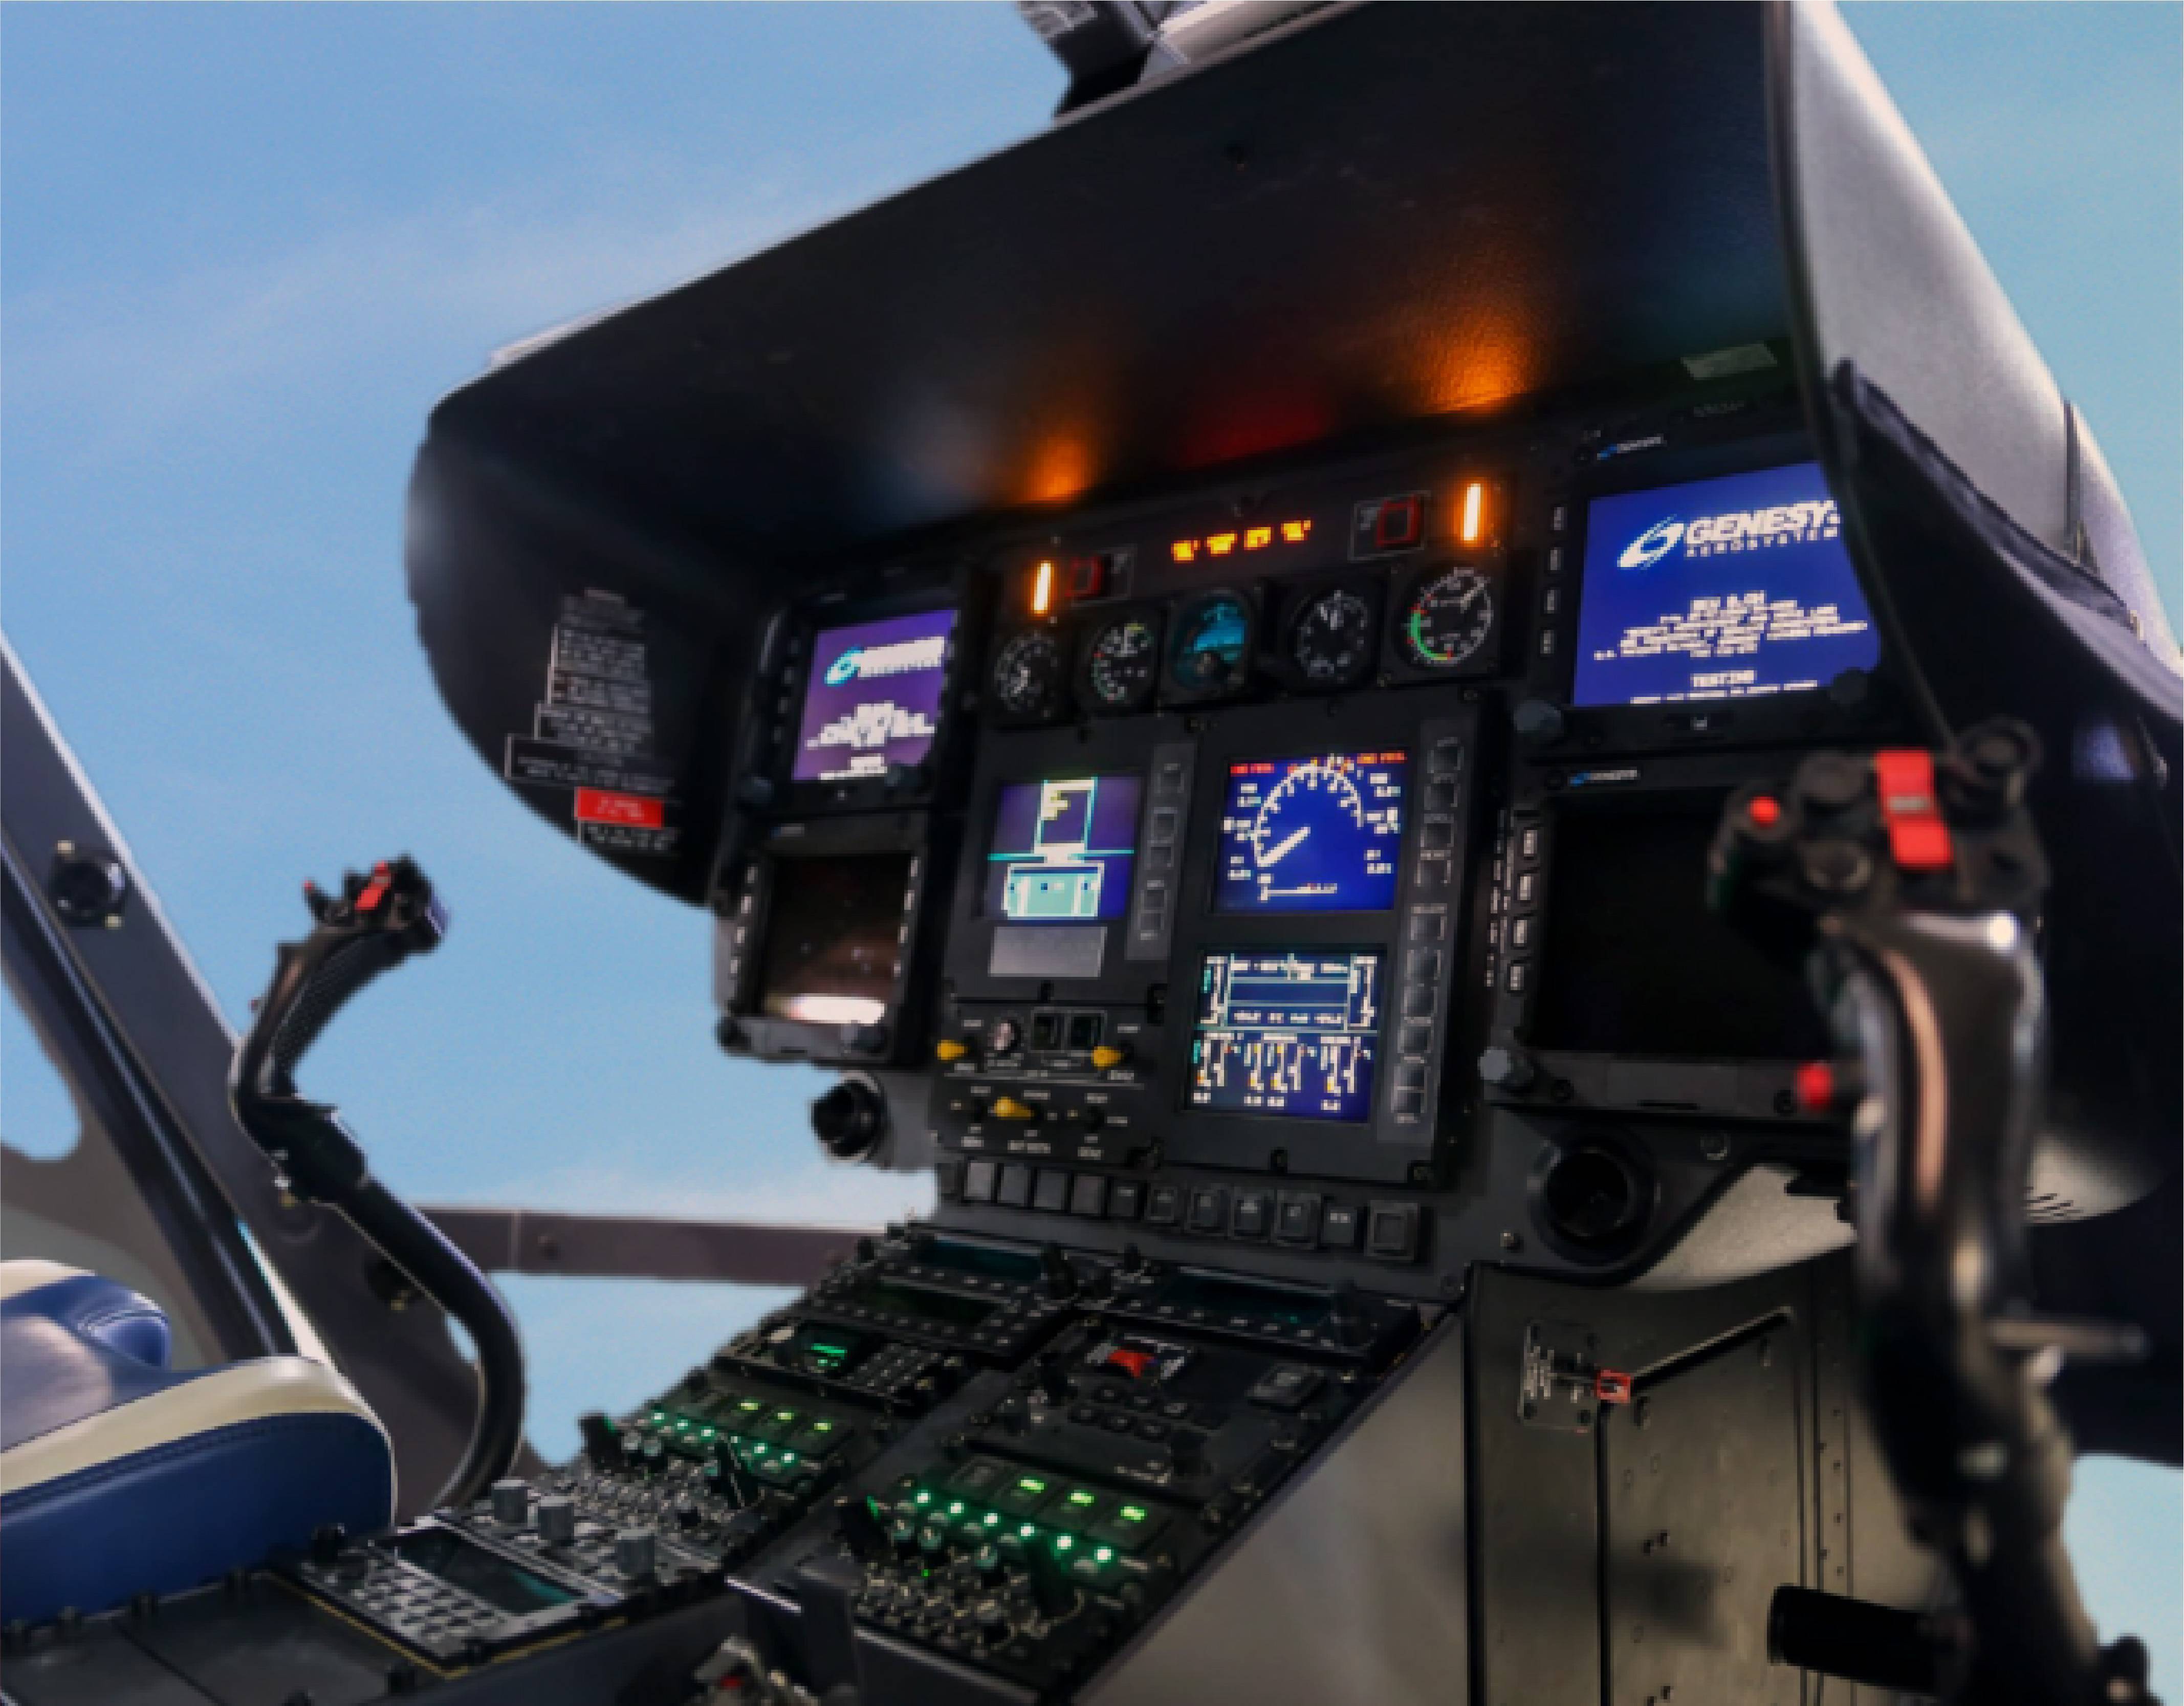 With support from Metro Aviation, Genesys AeroSystems and S-TEC established an FAA supplemental type certificate (STC) for the aircraft in February 2019 and Canadian approval is expected this year. Metro Aviation Photo